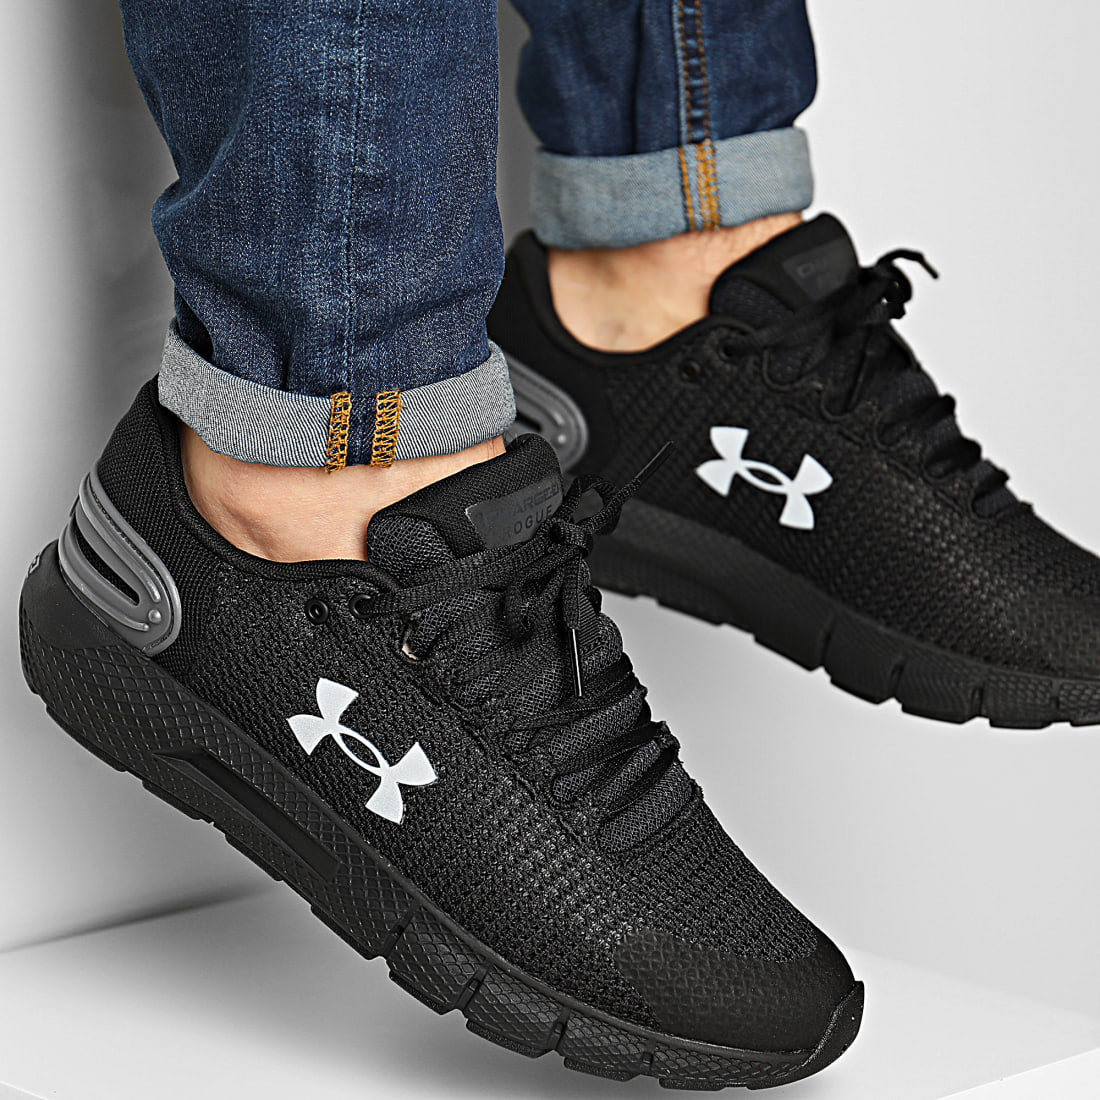 Under Armour - Baskets Charged Rogue 2 Reflective 3024735 Black